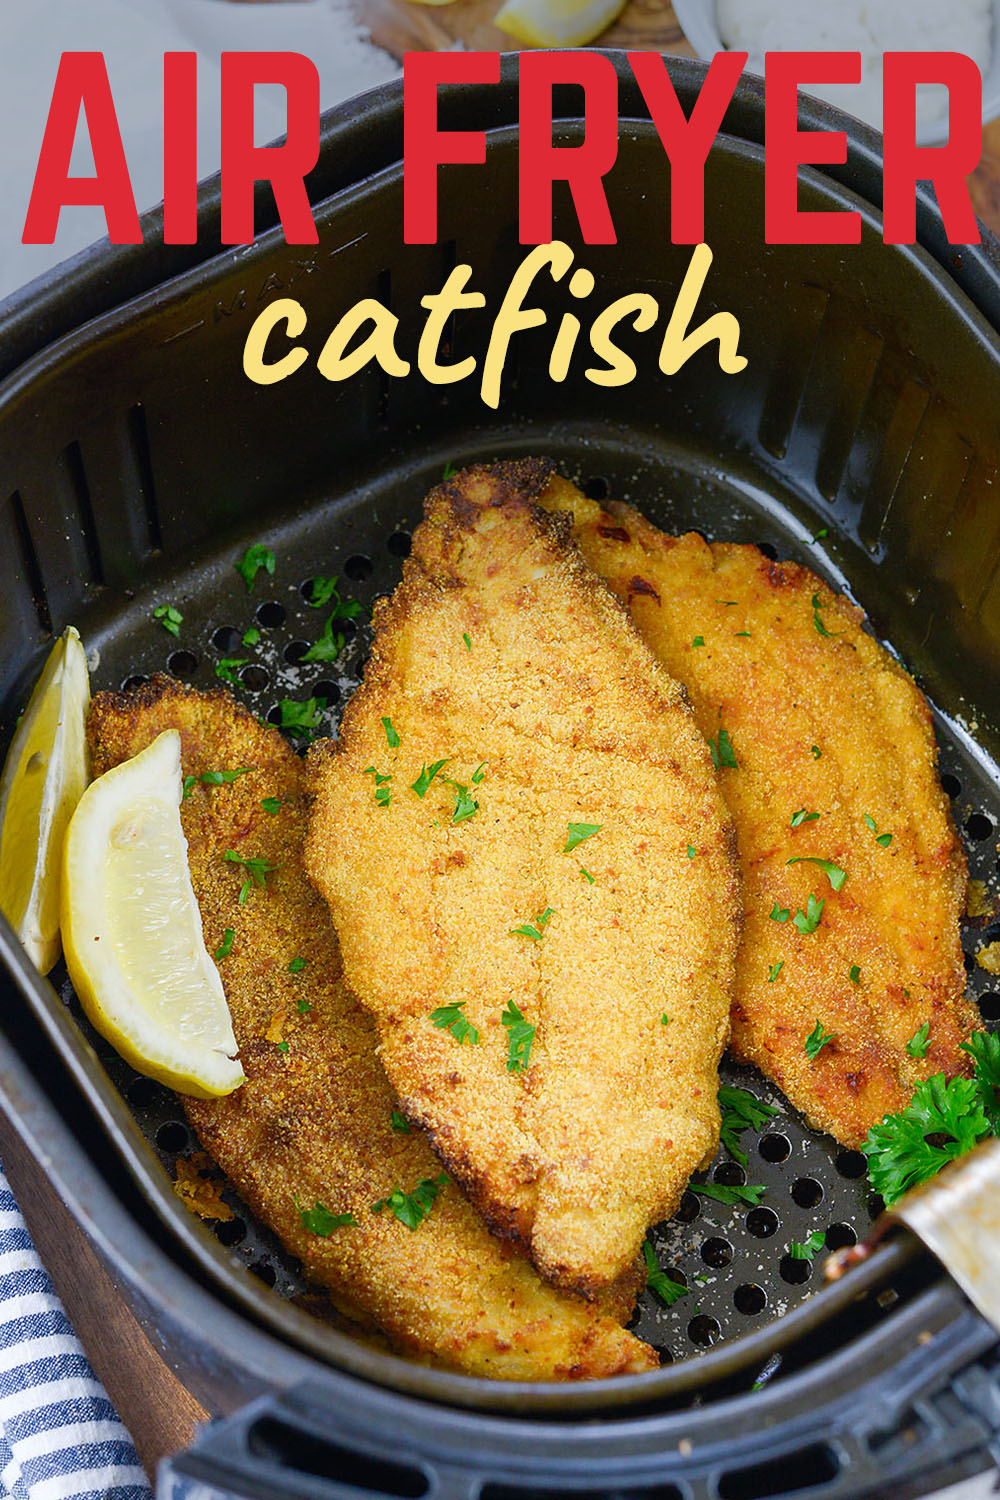 These cajun catish fillets were really easy to make in the air fryer!  We gave them a light cajun breading and can't wait to eat them again!